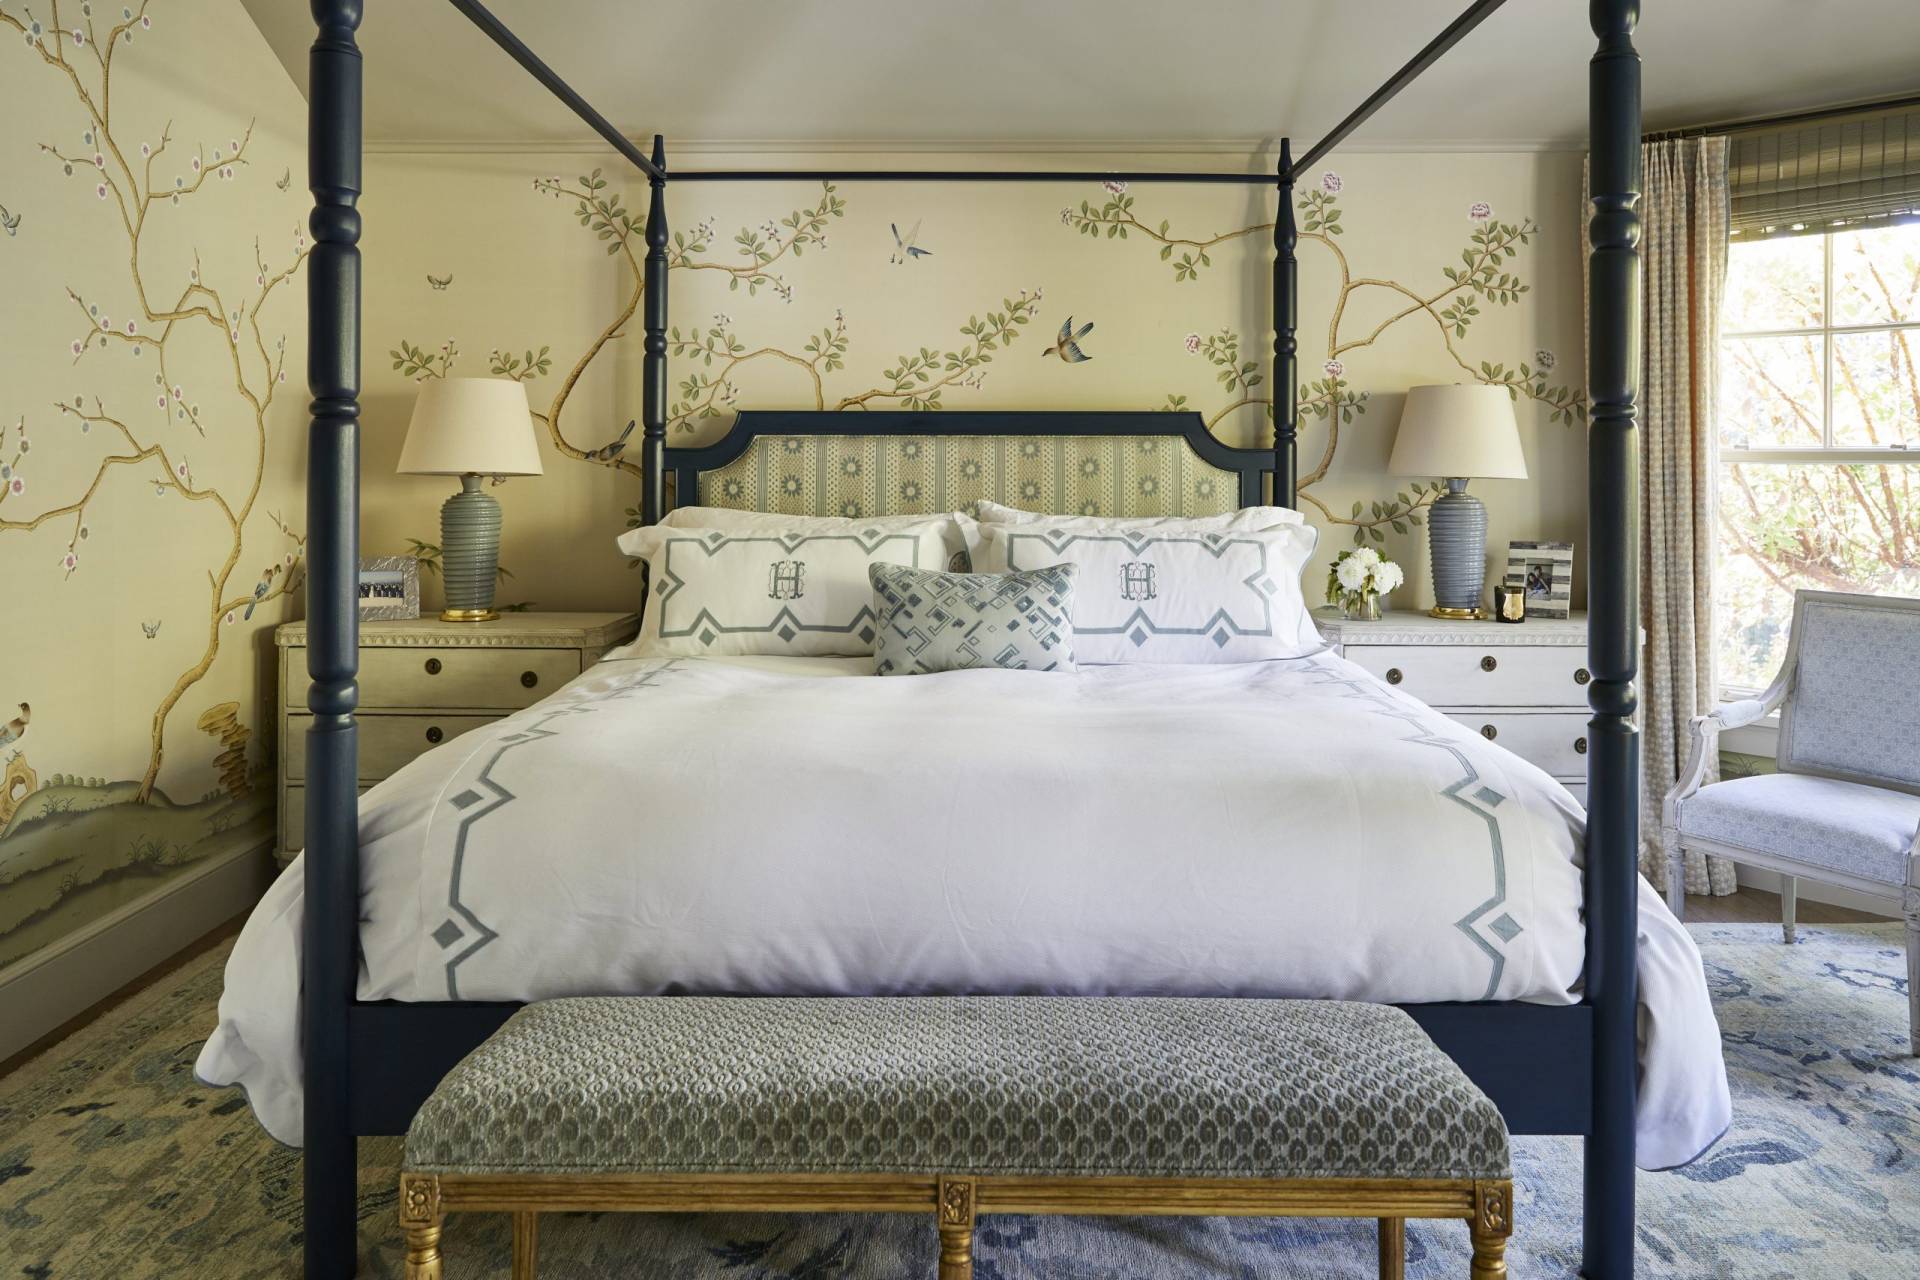 Wider view of upholstered headboard, custom bedding, and shams monographed